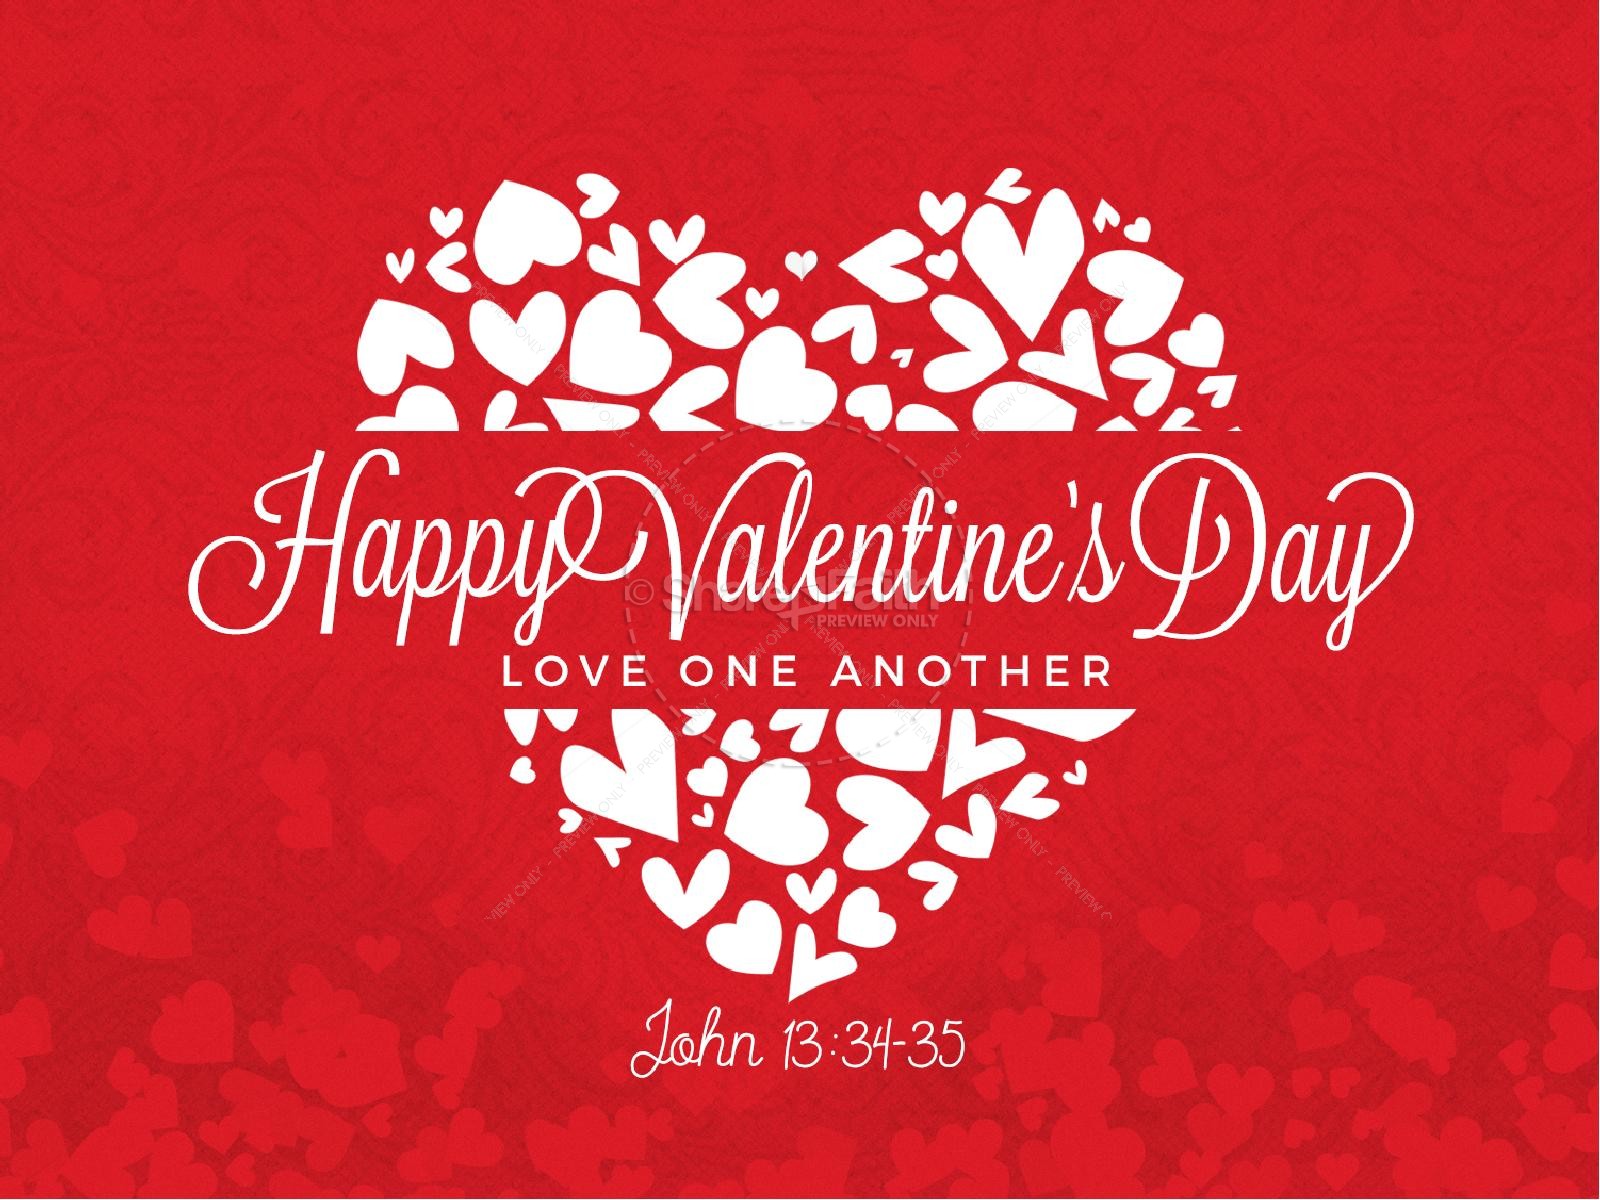 Happy Valentine's Day Love One Another Church PowerPoint | slide 1